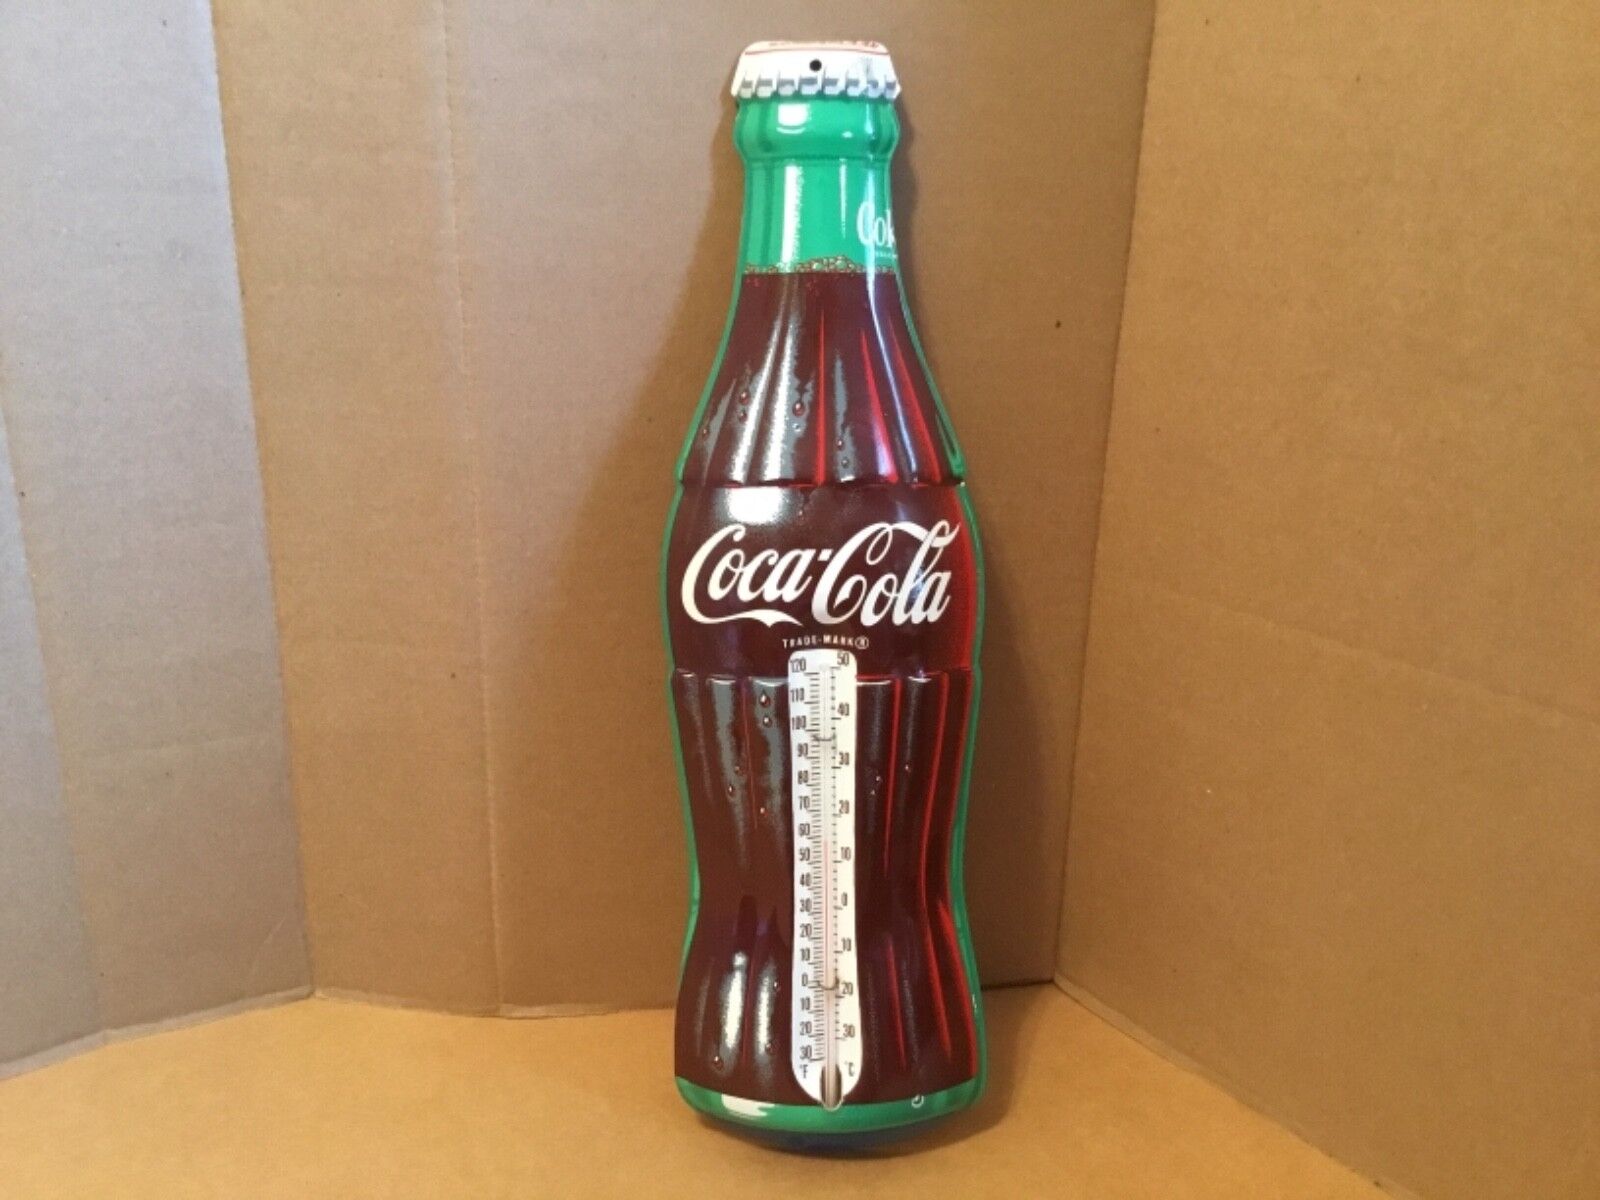 COCA-COLA BOTTLE THERMOMETER 17” M.C.A. MADE IN U.S.A. 